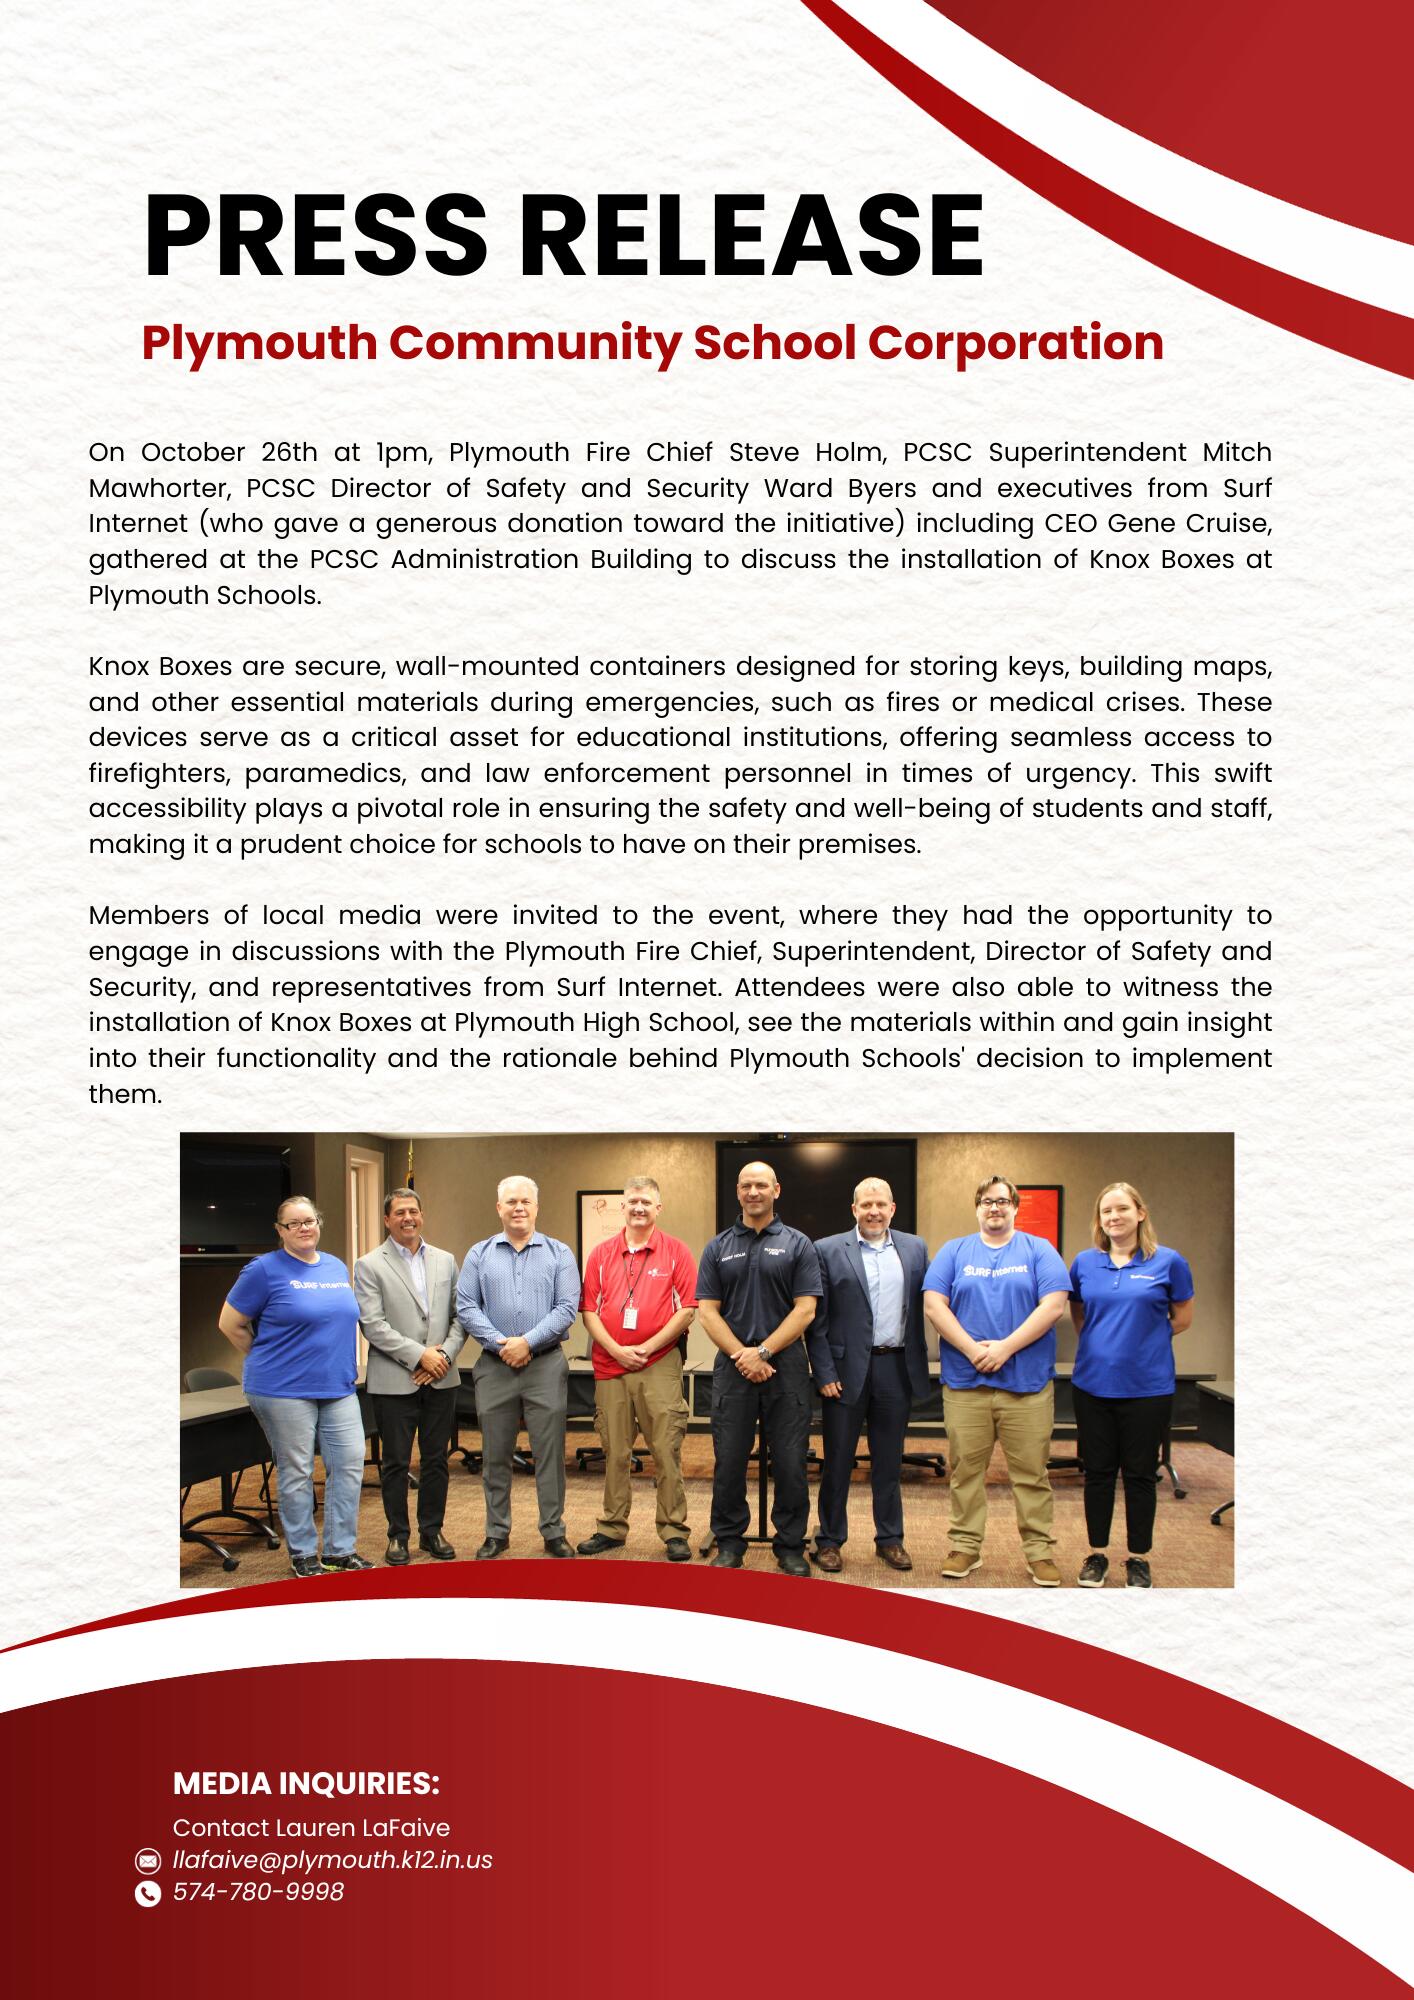 On October 26th at 1pm, Plymouth Fire Chief Steve Holm, PCSC Superintendent Mitch Mawhorter, PCSC Director of Safety and Security Ward Byers and executives from Surf Internet (who gave a generous donation toward the initiative) including CEO Gene Cruise, gathered at the PCSC Administration Building to discuss the installation of Knox Boxes at Plymouth Schools.   Knox Boxes are secure, wall-mounted containers designed for storing keys, building maps, and other essential materials during emergencies, such as fires or medical crises. These devices serve as a critical asset for educational institutions, offering seamless access to firefighters, paramedics, and law enforcement personnel in times of urgency. This swift accessibility plays a pivotal role in ensuring the safety and well-being of students and staff, making it a prudent choice for schools to have on their premises.  Members of local media were invited to the event, where they had the opportunity to engage in discussions with the Plymouth Fire Chief, Superintendent, Director of Safety and Security, and representatives from Surf Internet. Attendees were also able to witness the installation of Knox Boxes at Plymouth High School, see the materials within and gain insight into their functionality and the rationale behind Plymouth Schools' decision to implement them.